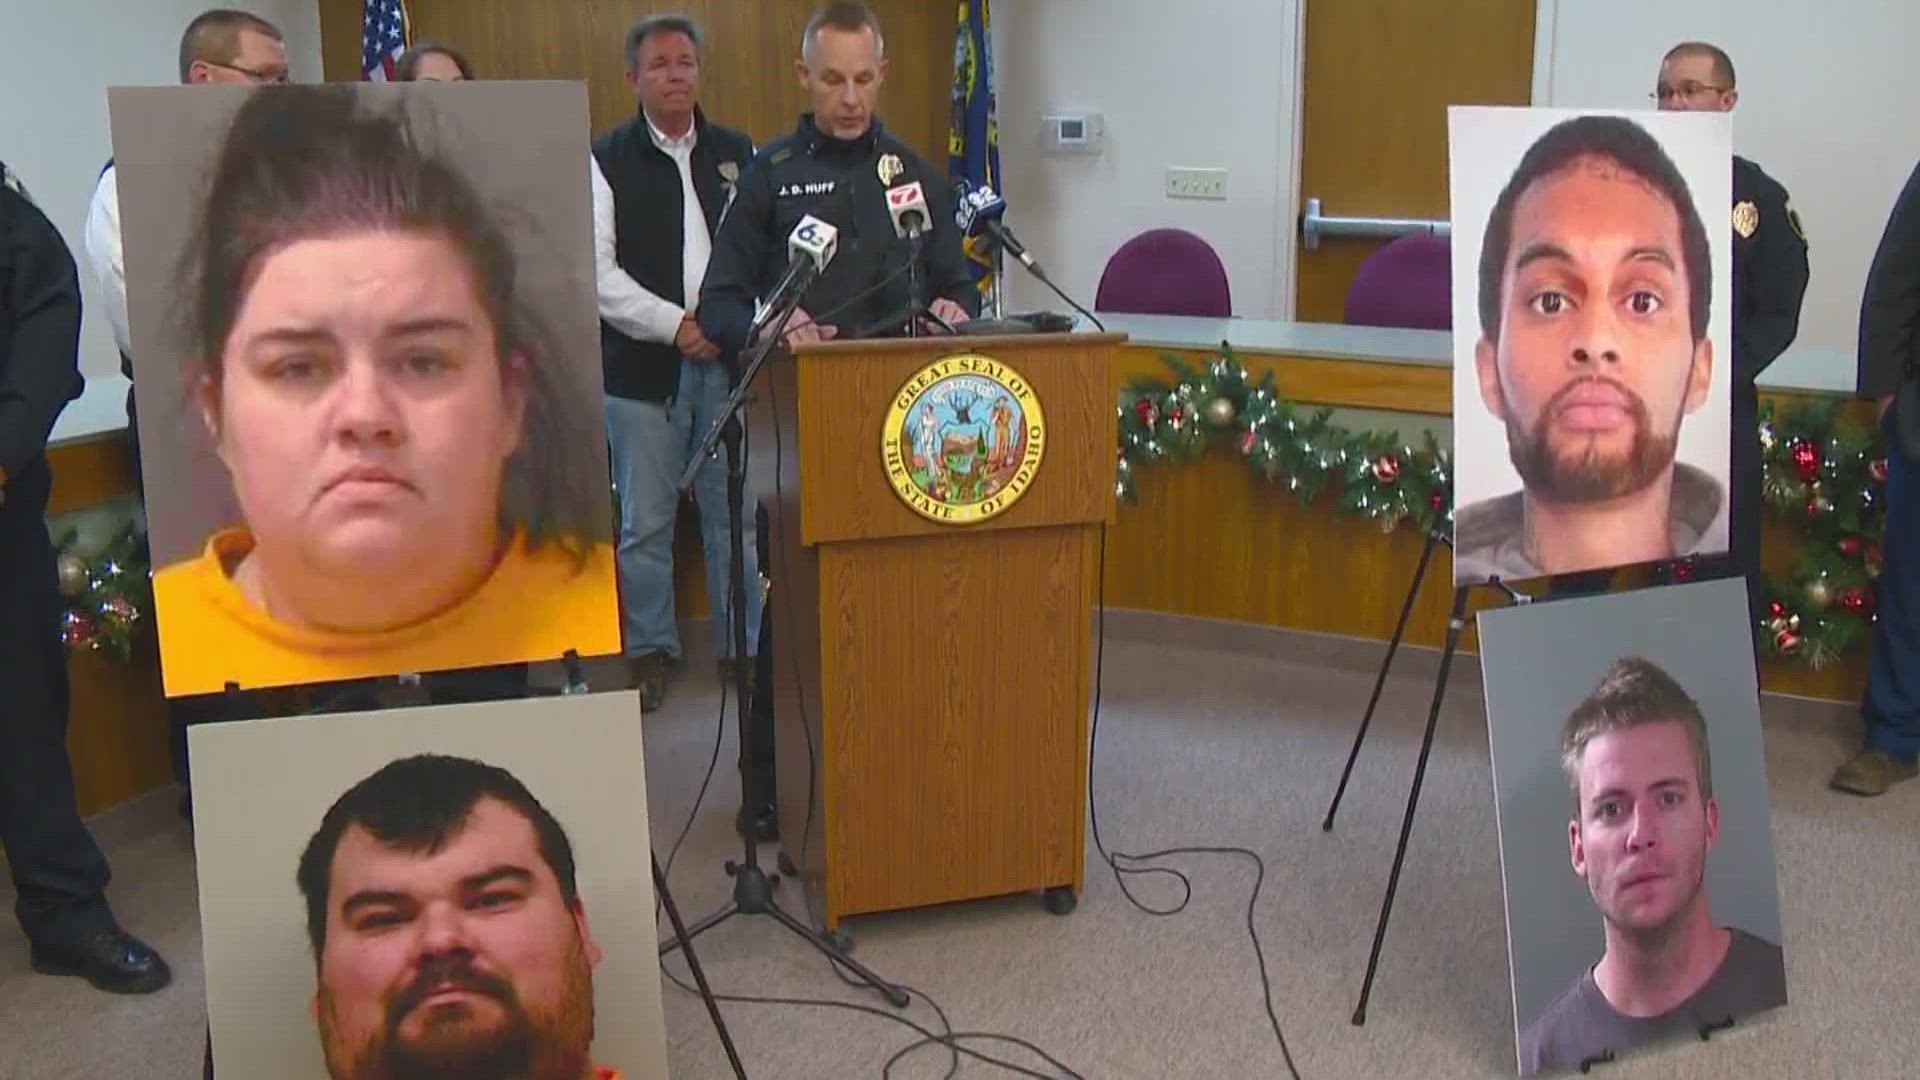 Fruitland Police held a news conference to discuss the latest information in the Michael Vaughan case.